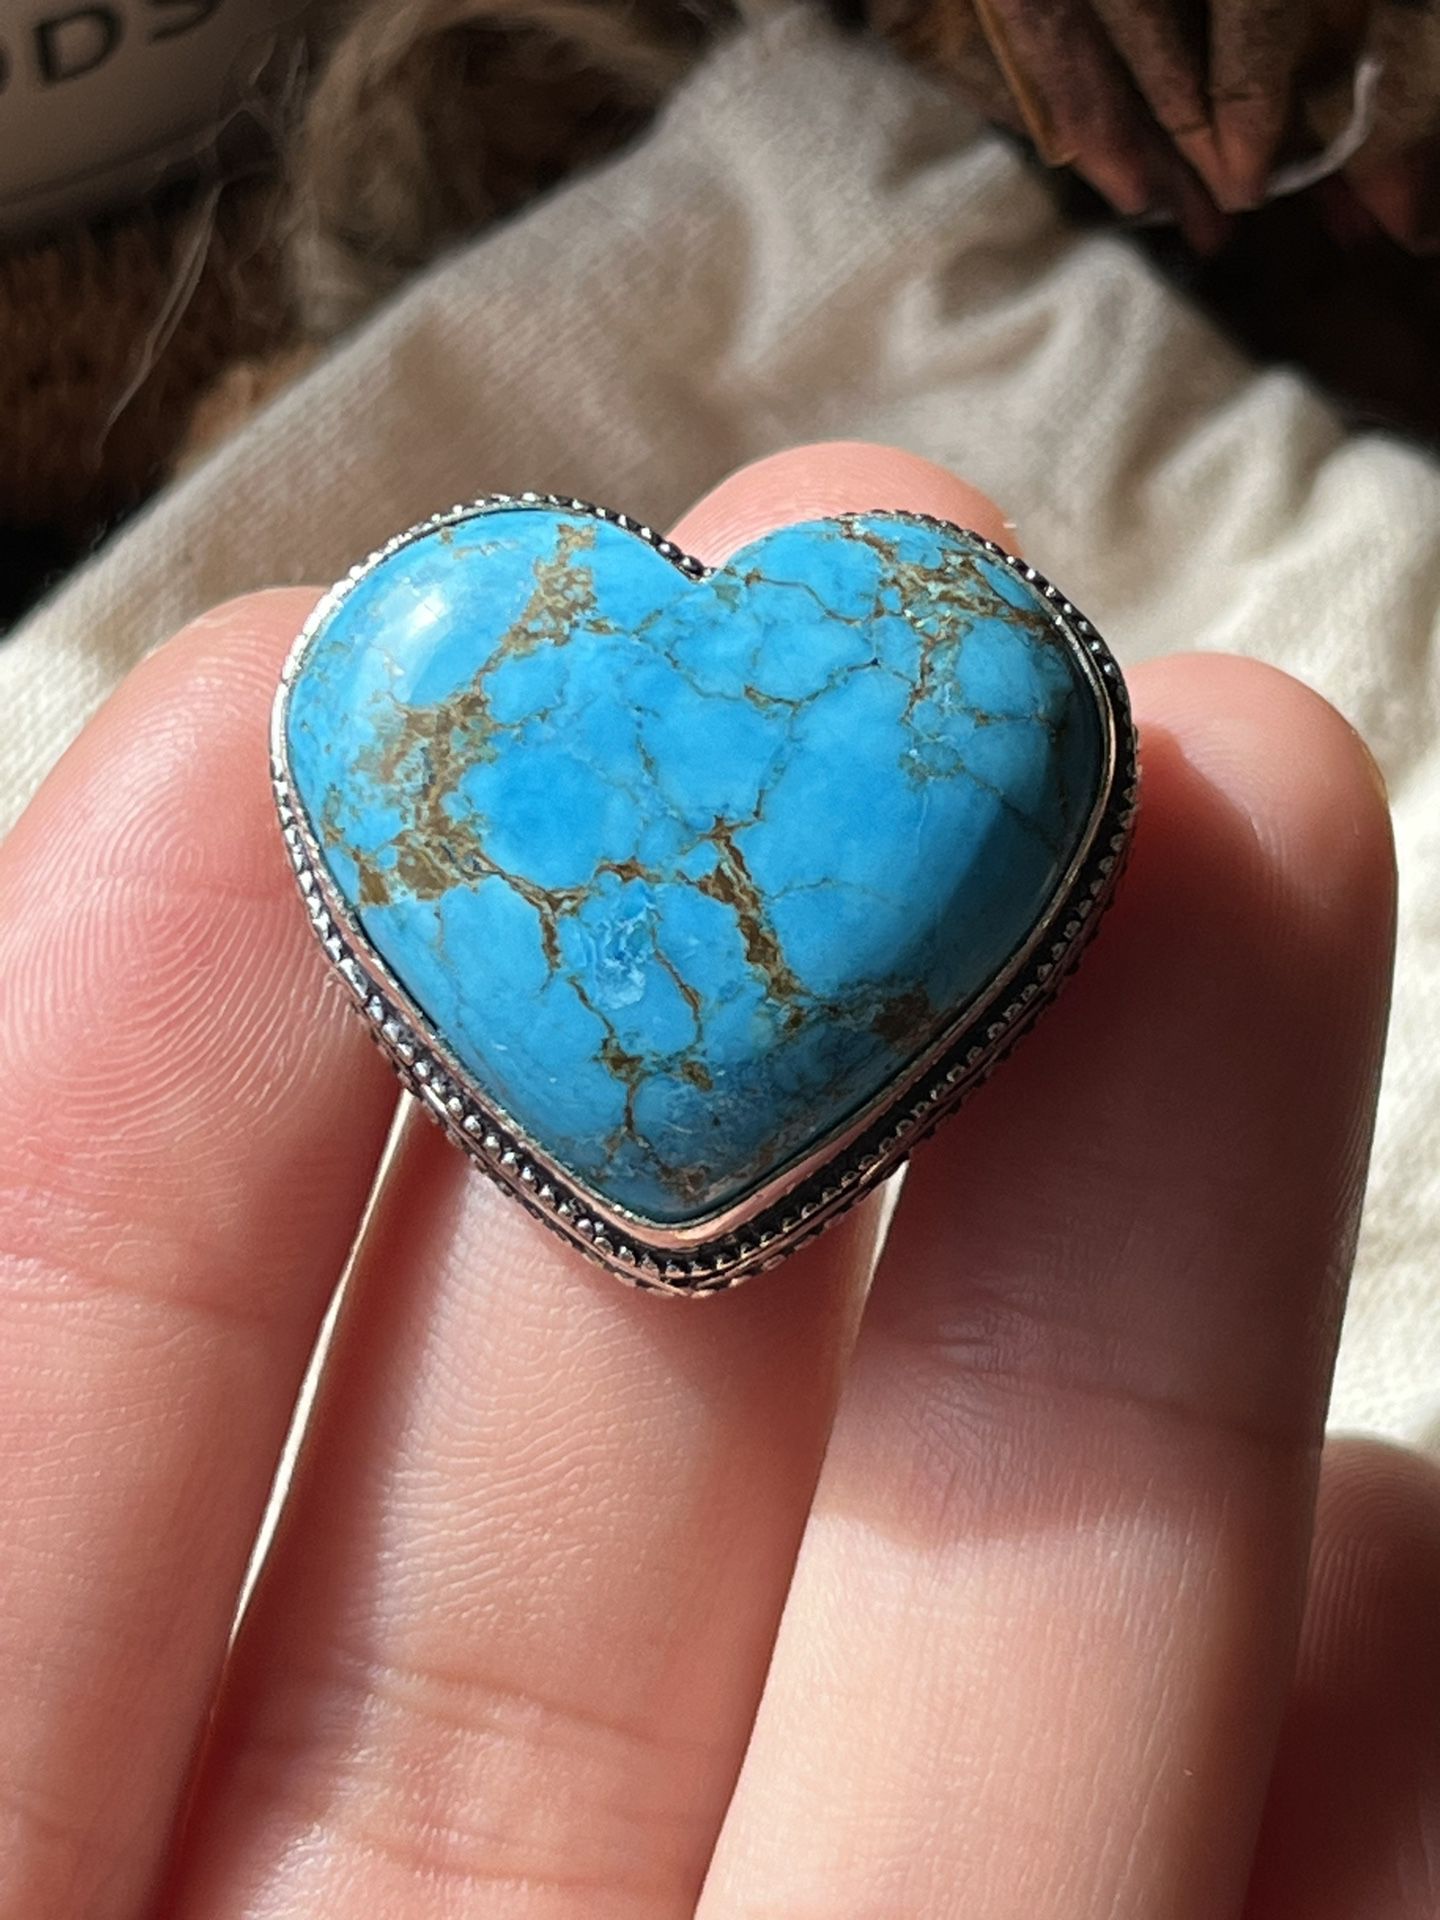 Size 7.5 925 silver overlay turquoise heart ring